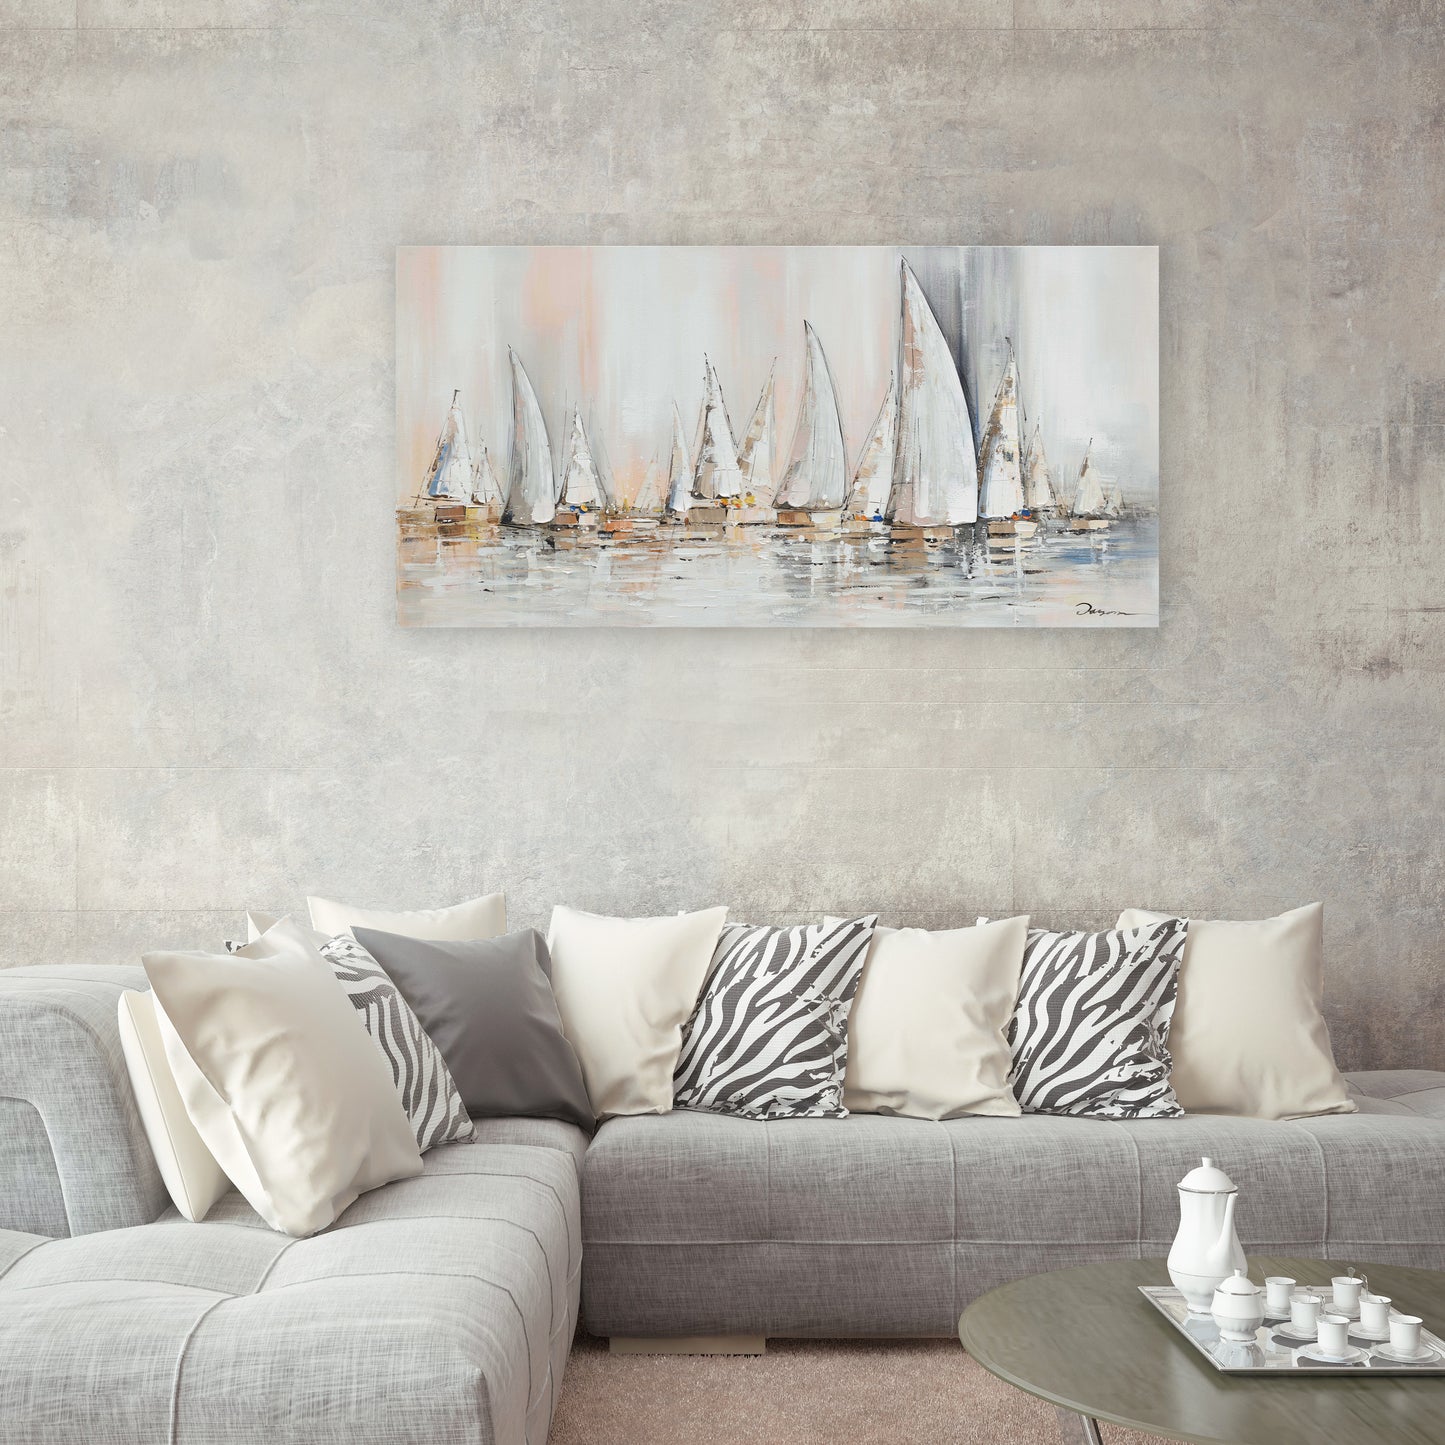 Wrapped Canvas Painting. wall art, canvas artwork for living room, bedroom, office